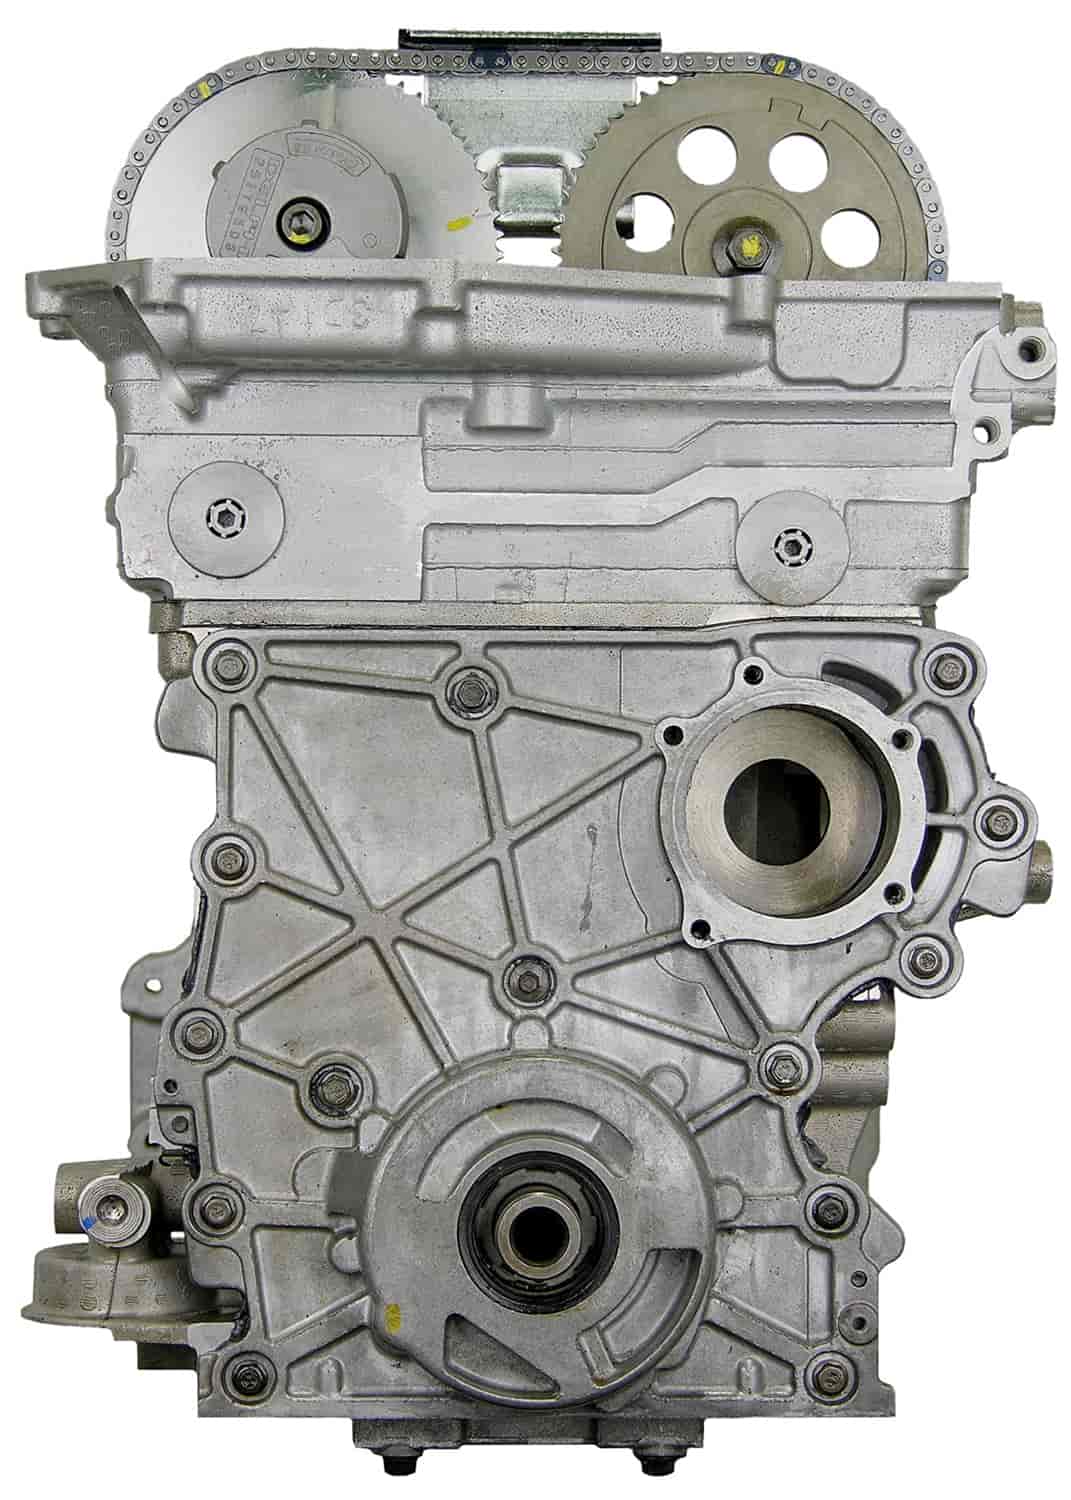 Remanufactured Crate Engine for 2002-2004 Chevy/Buick/GMC/Oldsmobile SUV with 4.2L L6